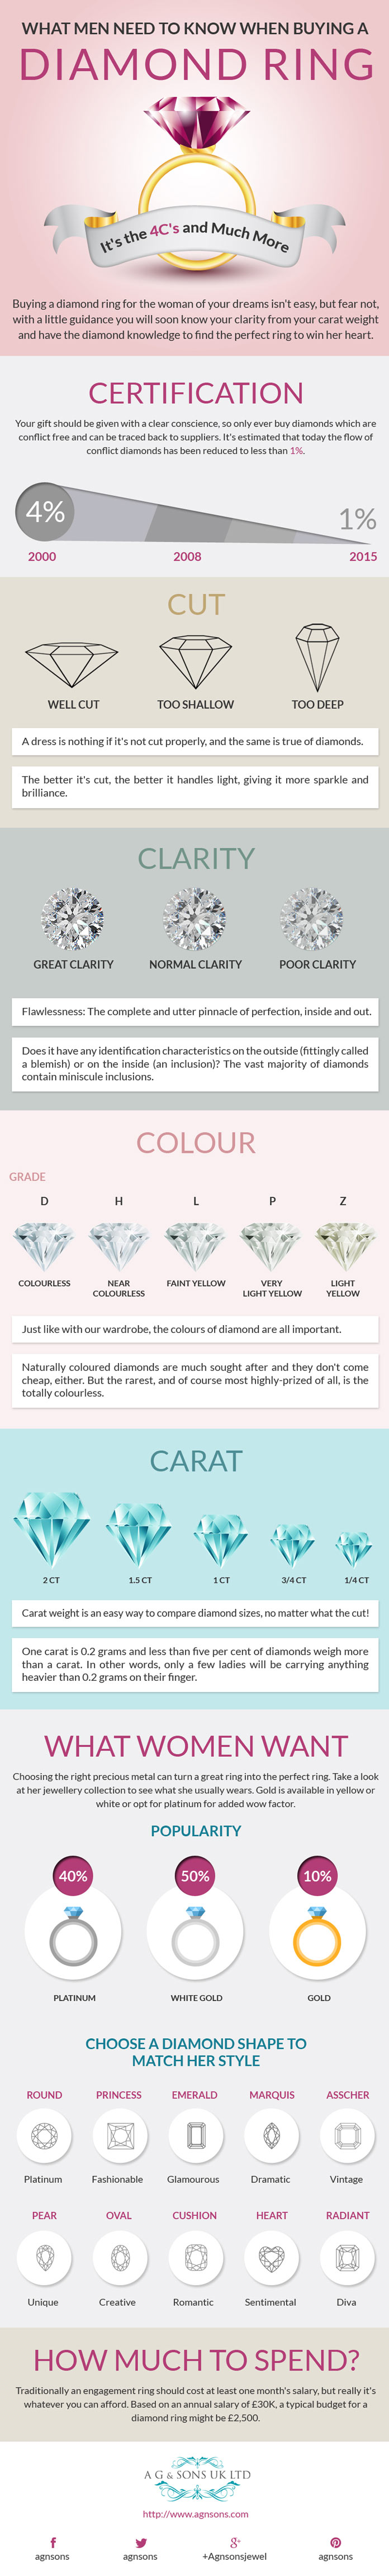 What Men Need to Know When Buying A Diamond Ring